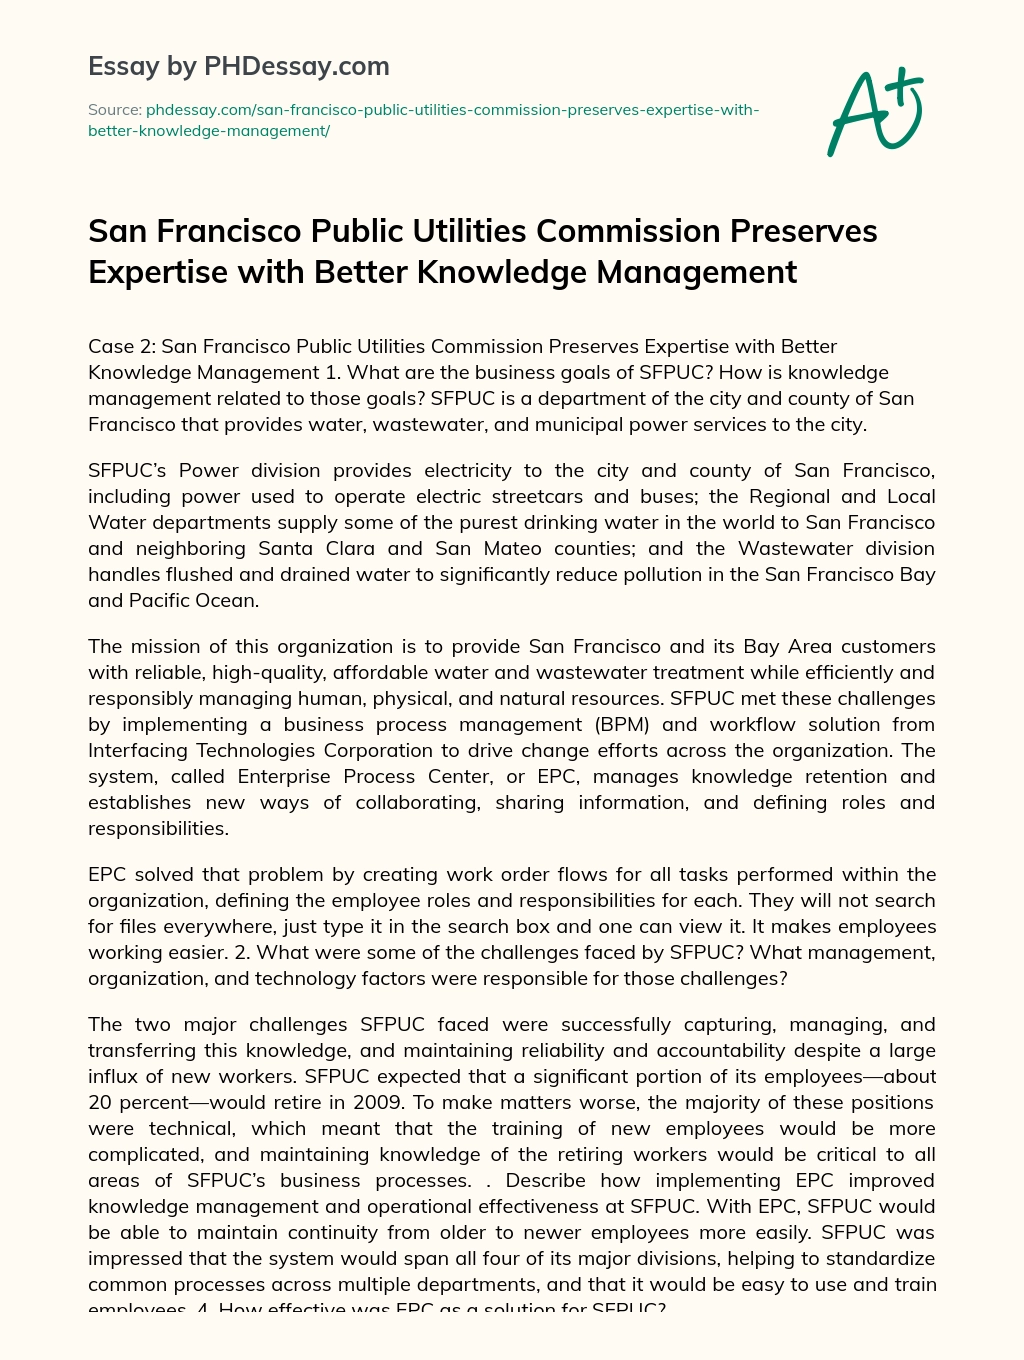 San Francisco Public Utilities Commission Preserves Expertise with Better Knowledge Management essay